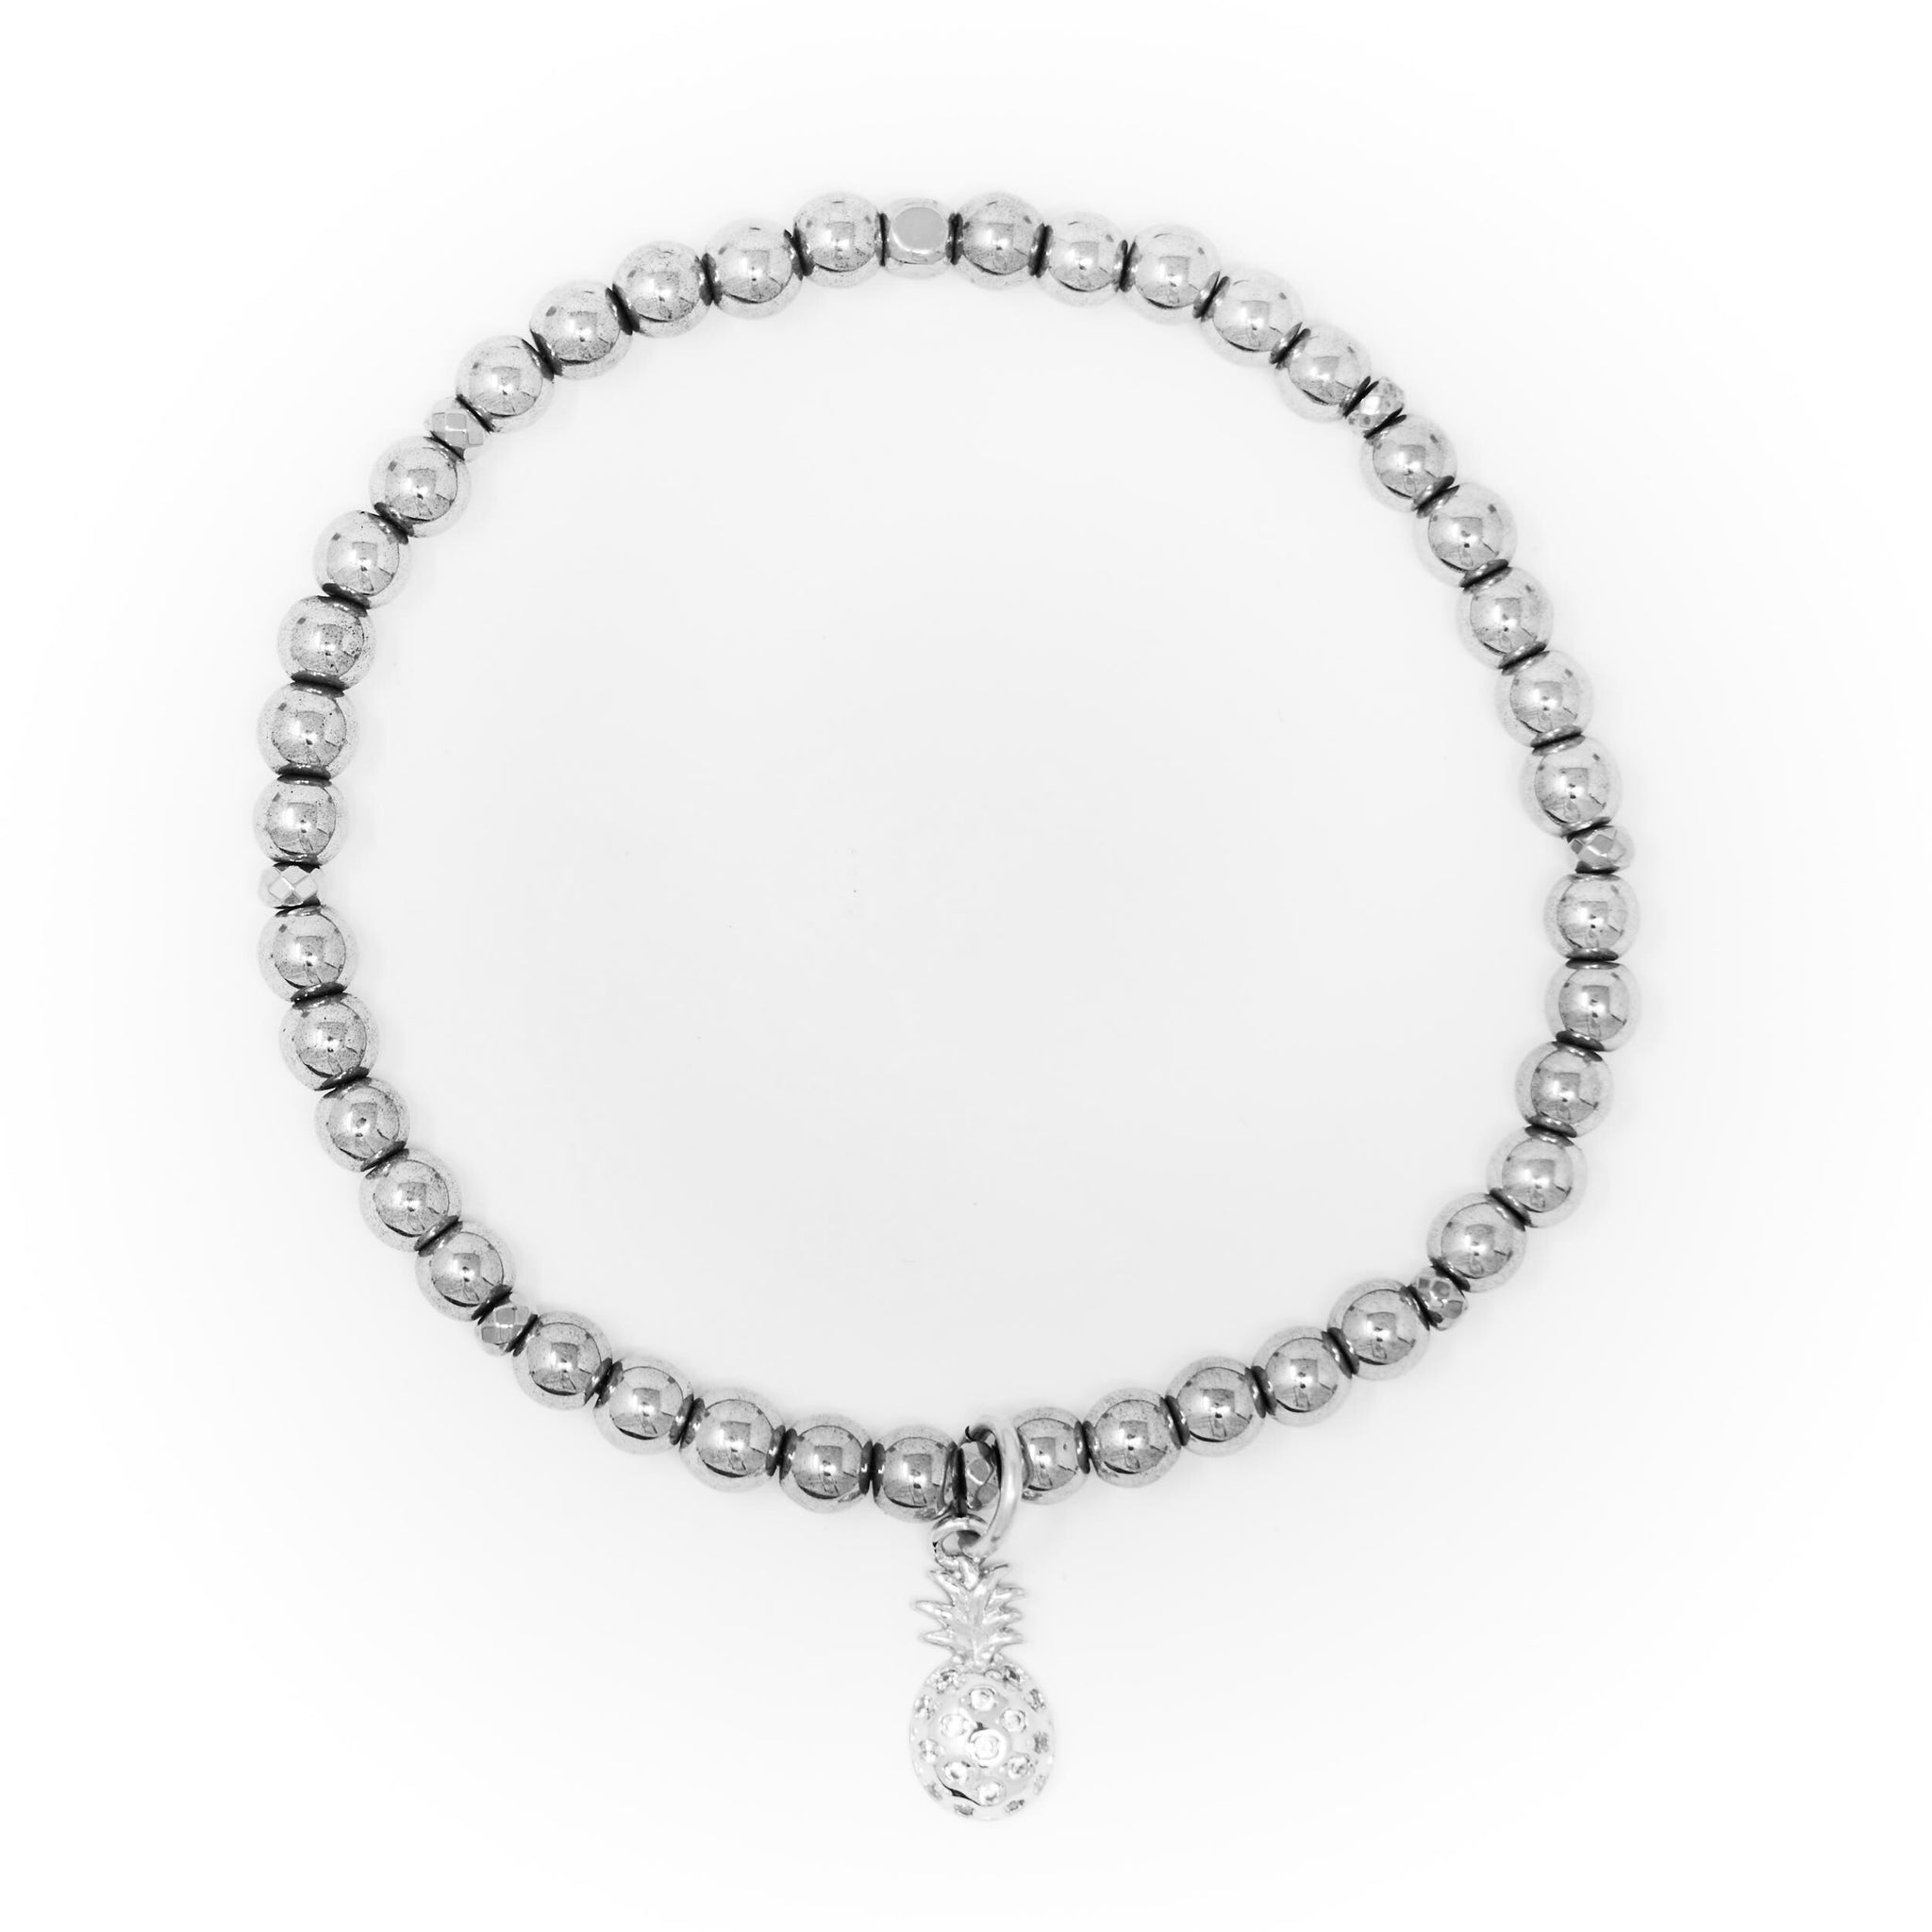 Hematite Polished with Silver Bracelet, Silver Pineapple Charm with Clear Zirconia